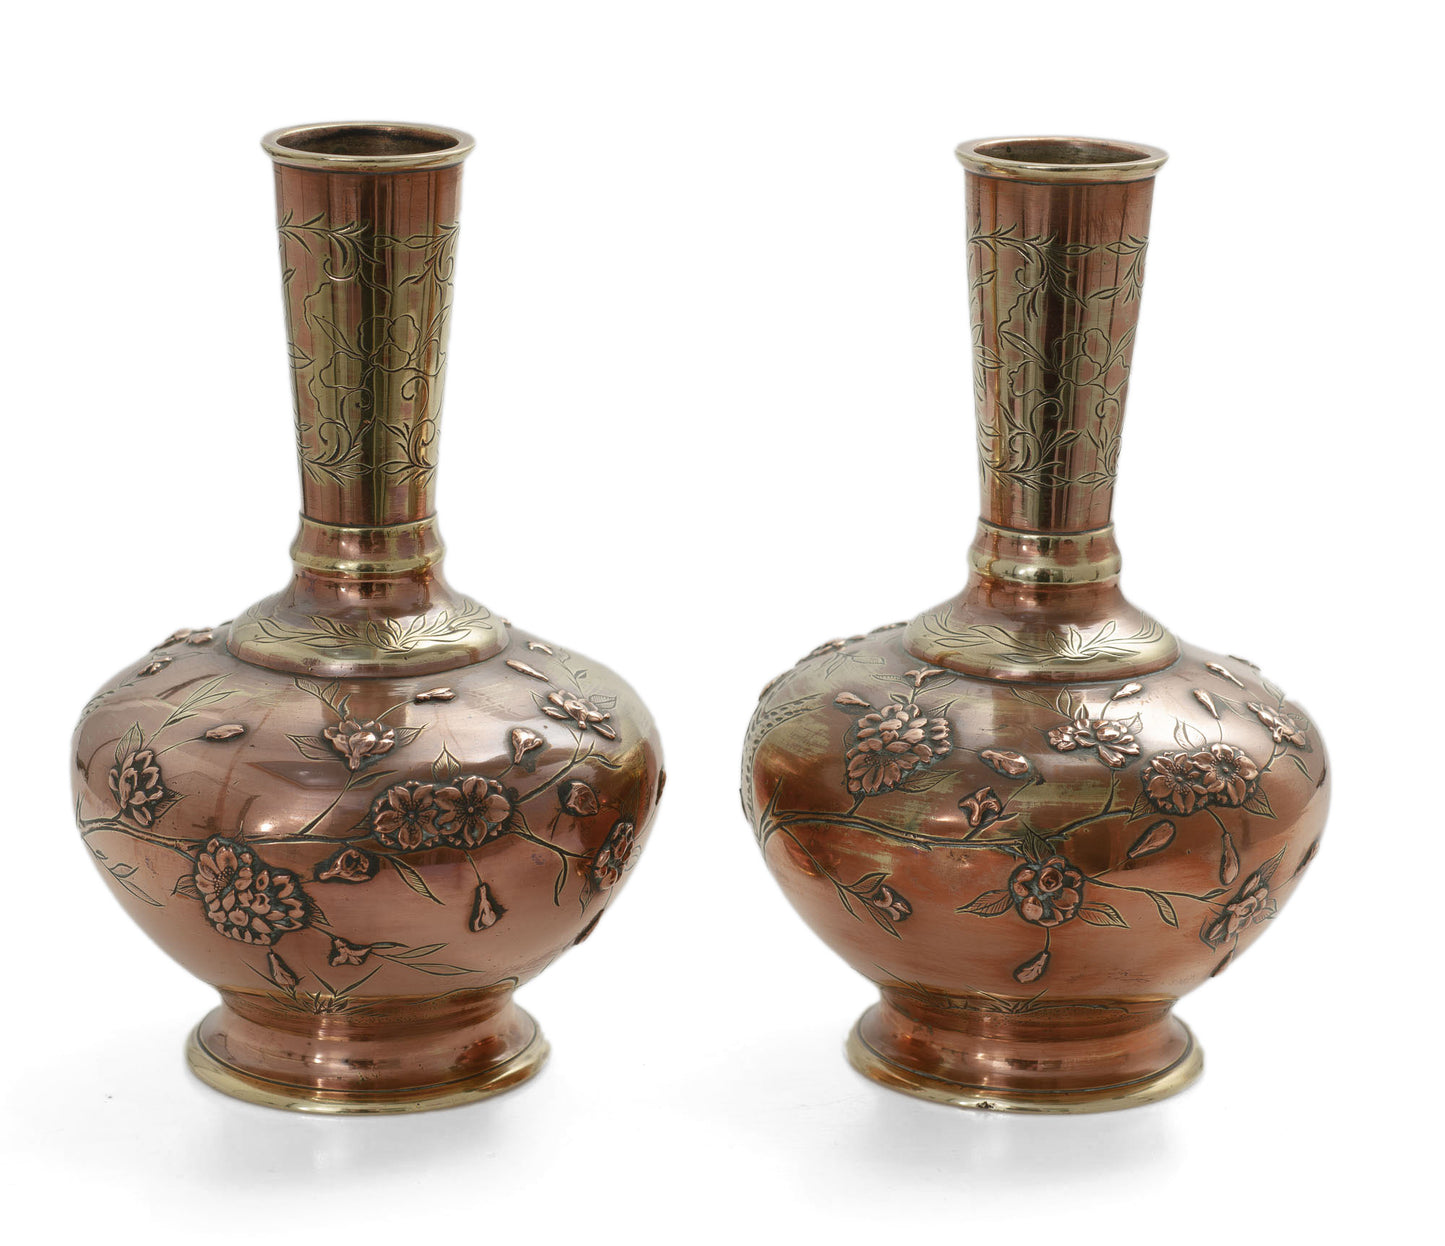 Pair Antique Japanese Aesthetic Coppered Brass Vases with Birds and Blossom (2981)